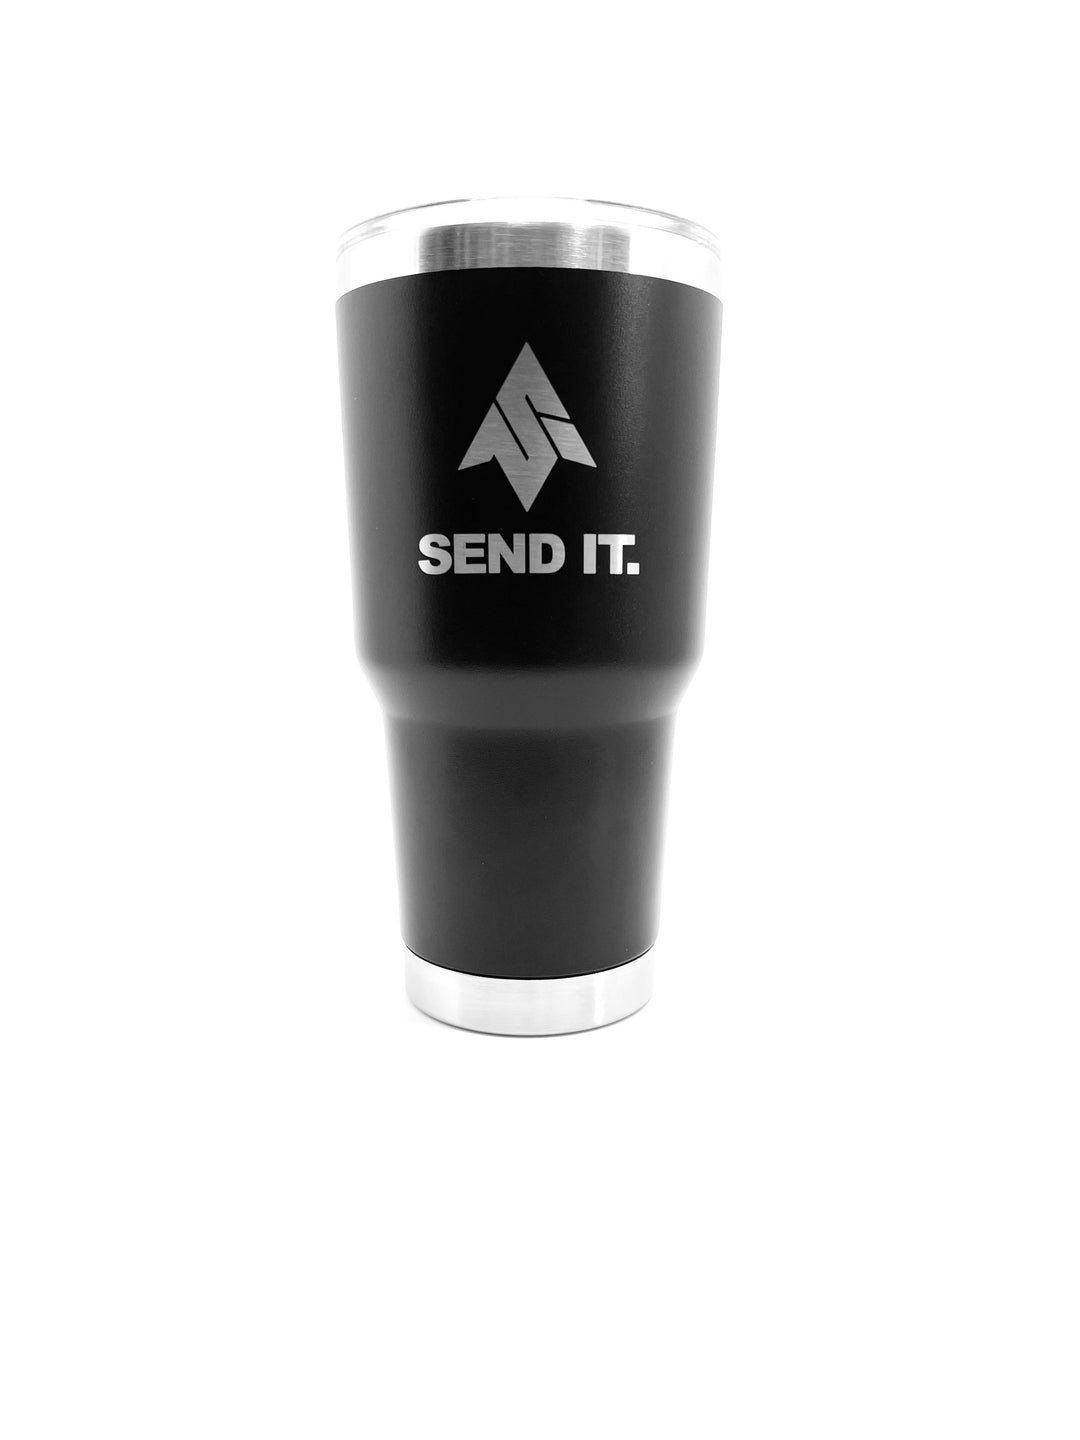 The send it 30oz tumbler with lid shown secured on the send it 30 oz stainless steel vacuum insulated tumbler. The send it tumbler features the iconic send it logo laser etched onto the tumbler.